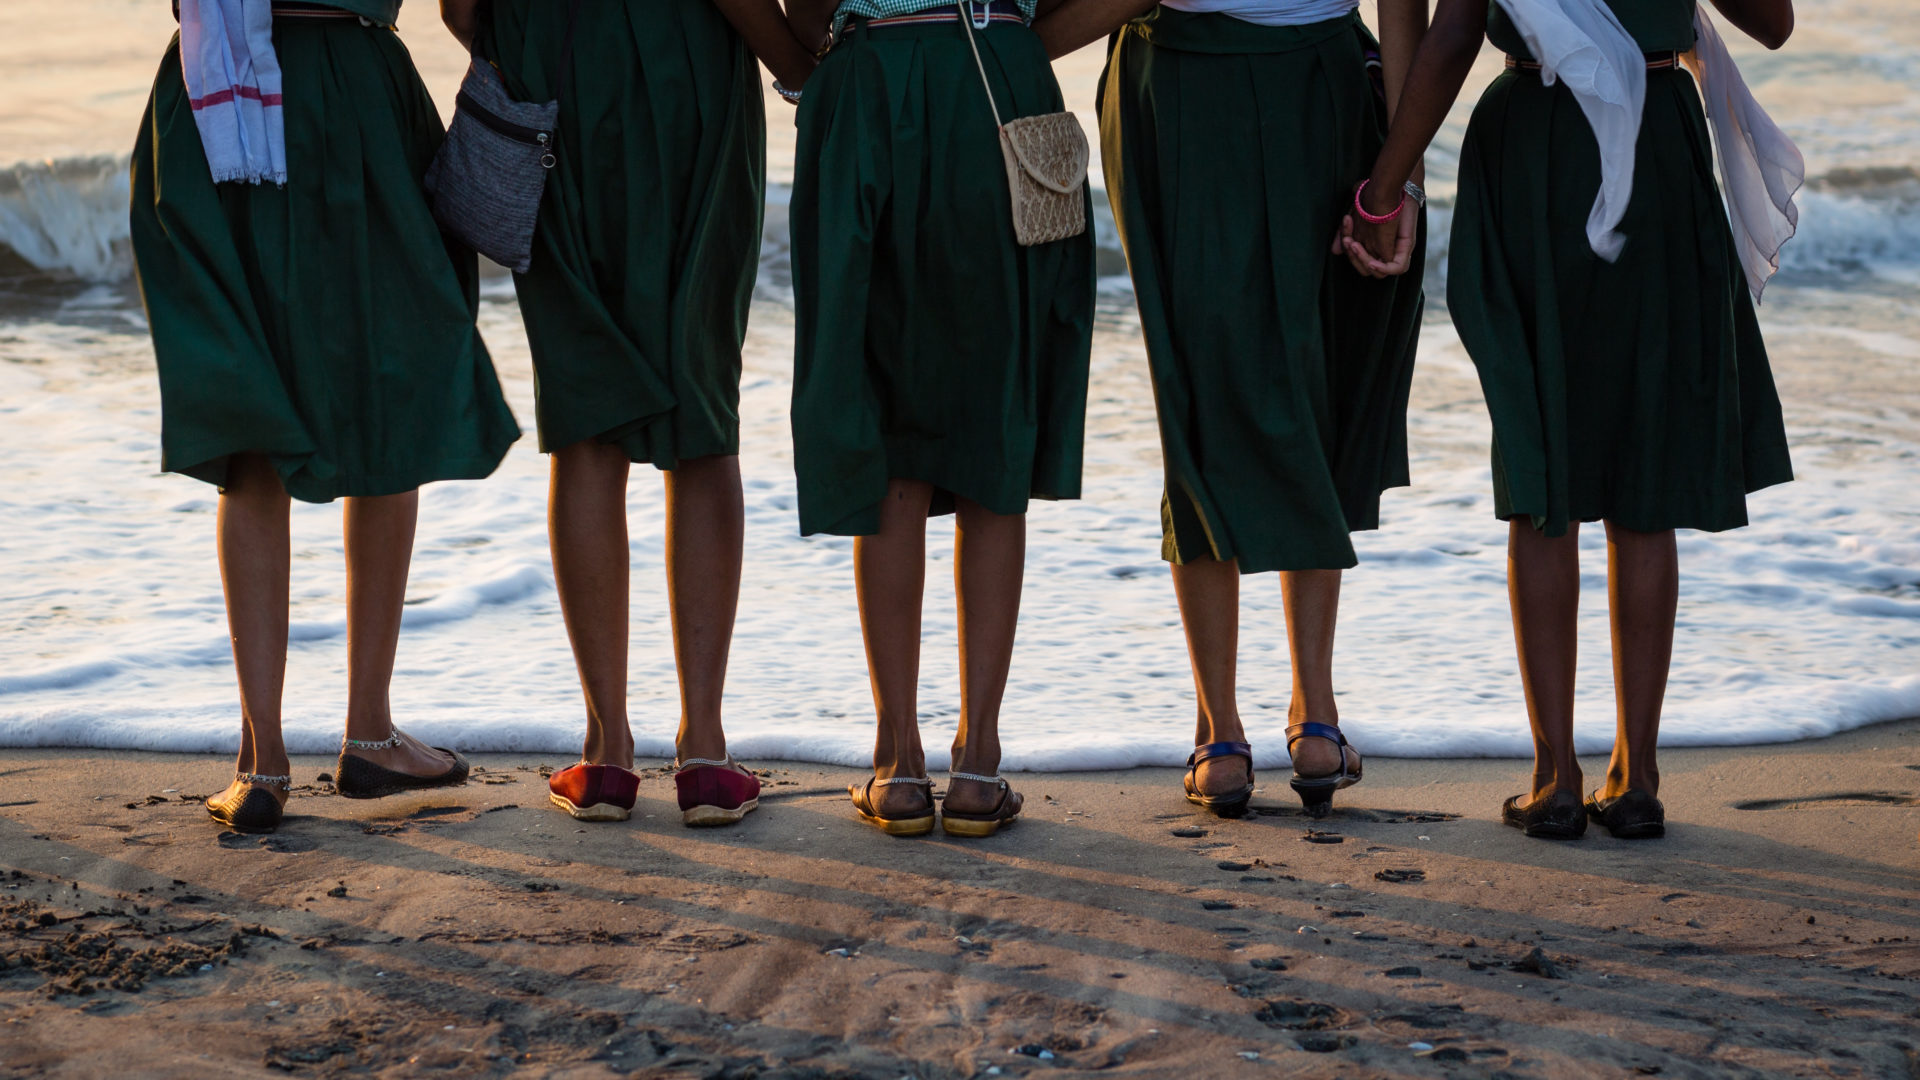 Group Of Girls Standing In Font Of The Waterline Of The Ocean At Cochin Beach, India.